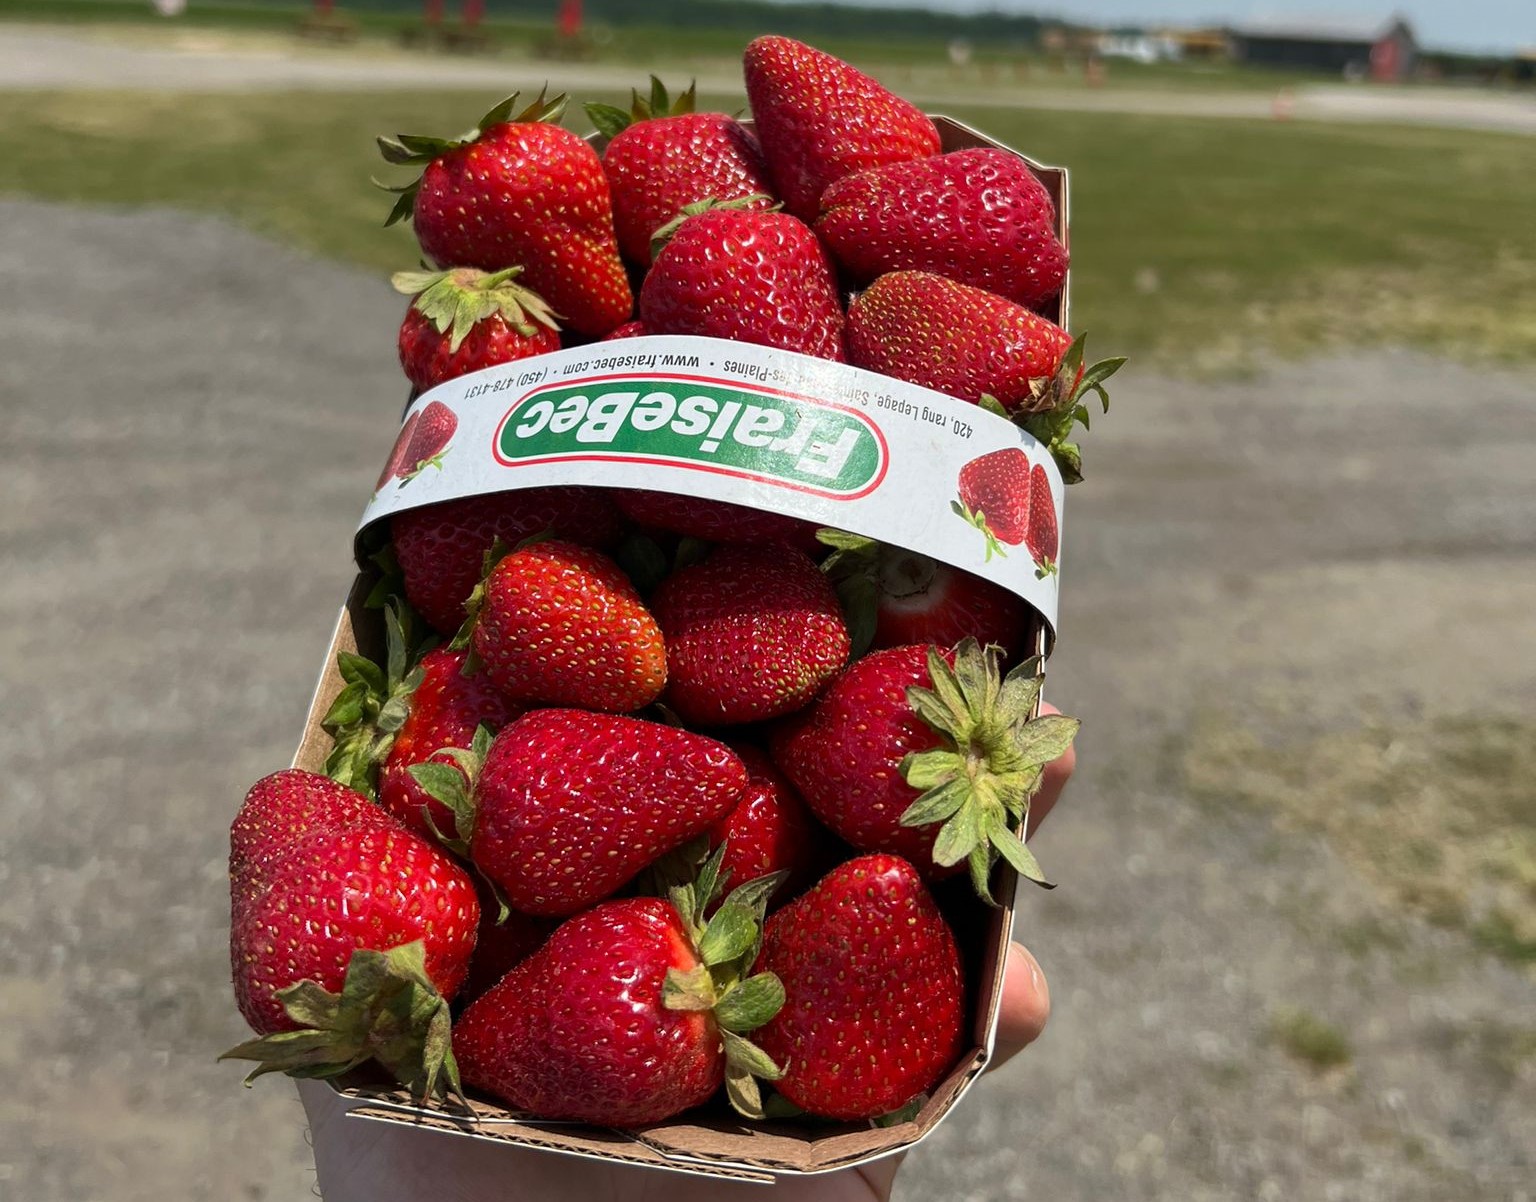 Quebec strawberries have arrived, but you might find yourself paying more